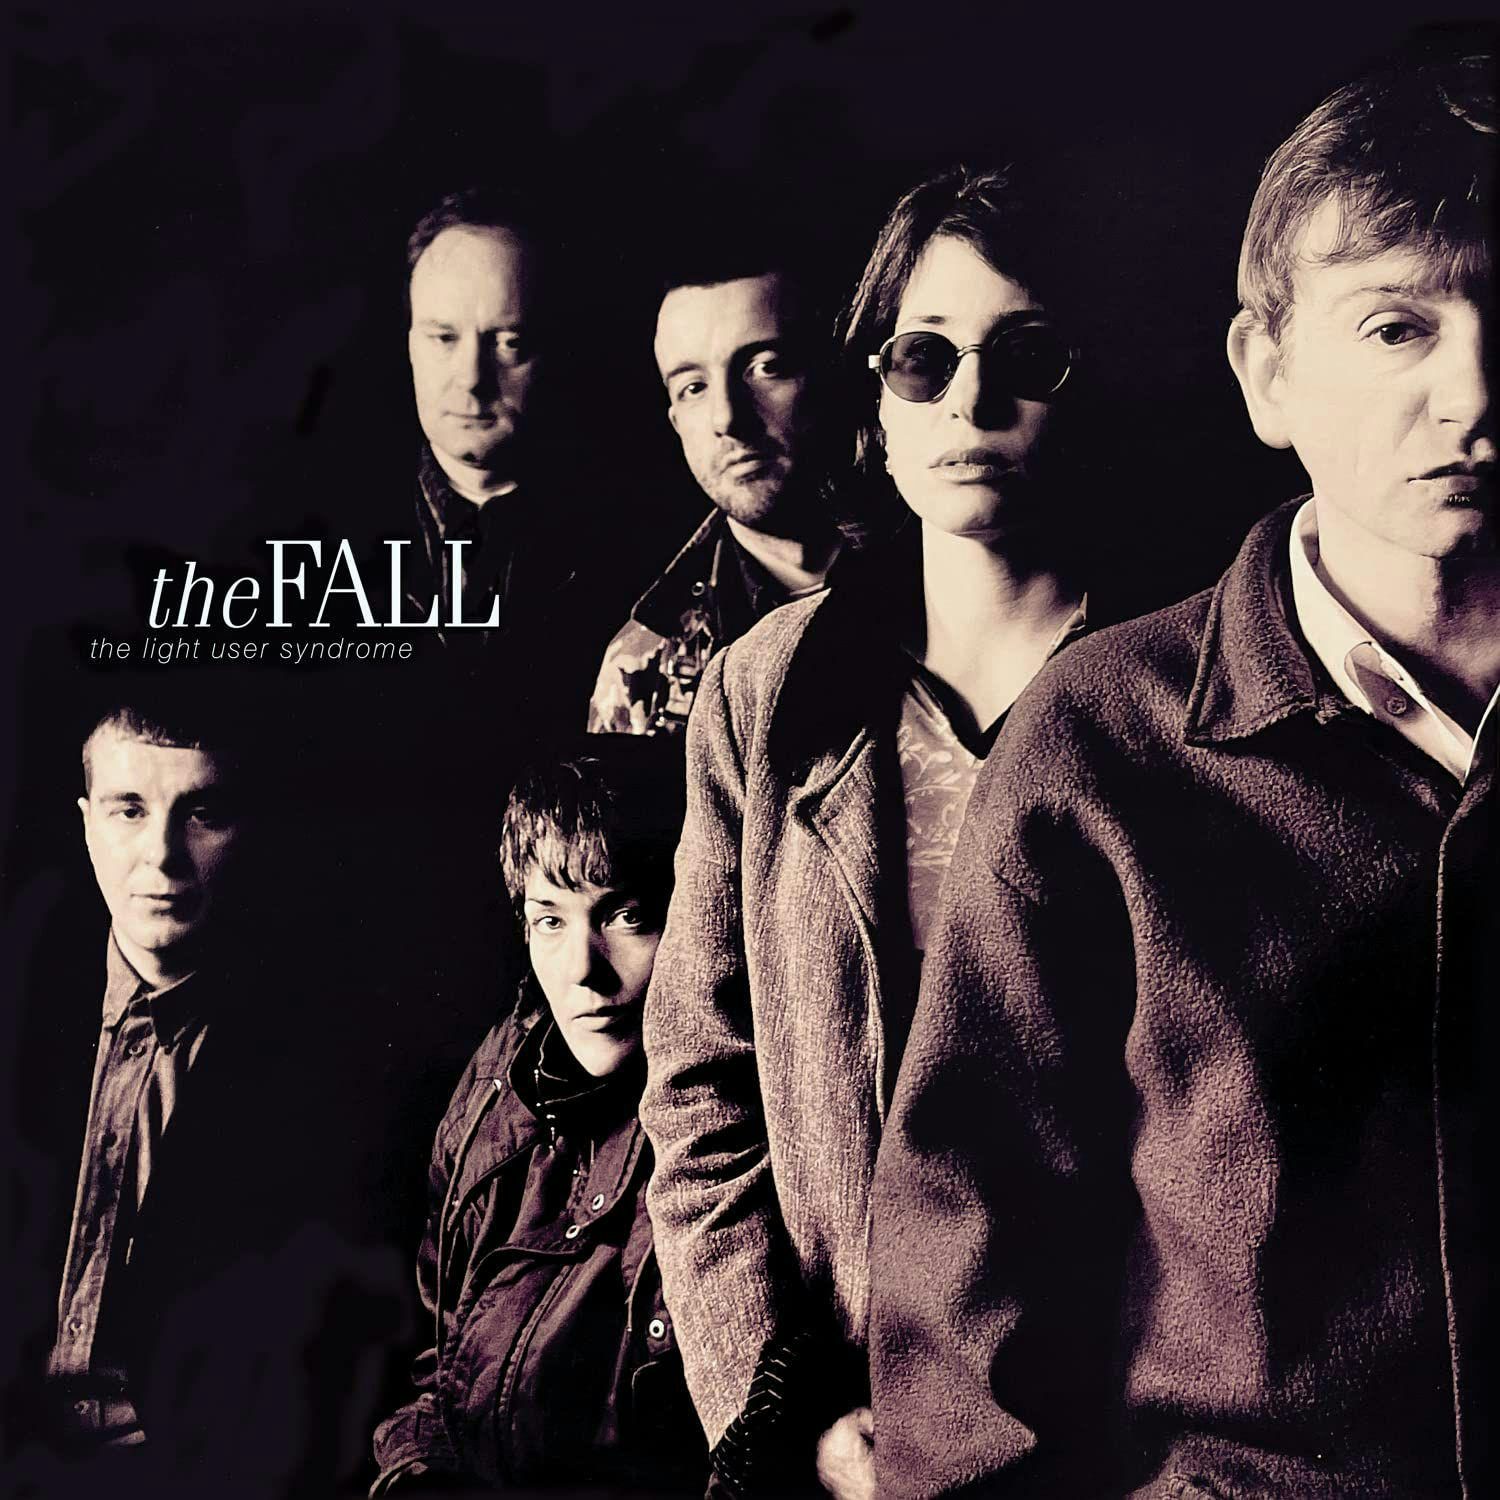 Fall слушать. Edgar Broughton Band. The Fall 1999. Beginnings - the Lost Tapes 1988-1991. 10 Years 2005 the autumn Effect.